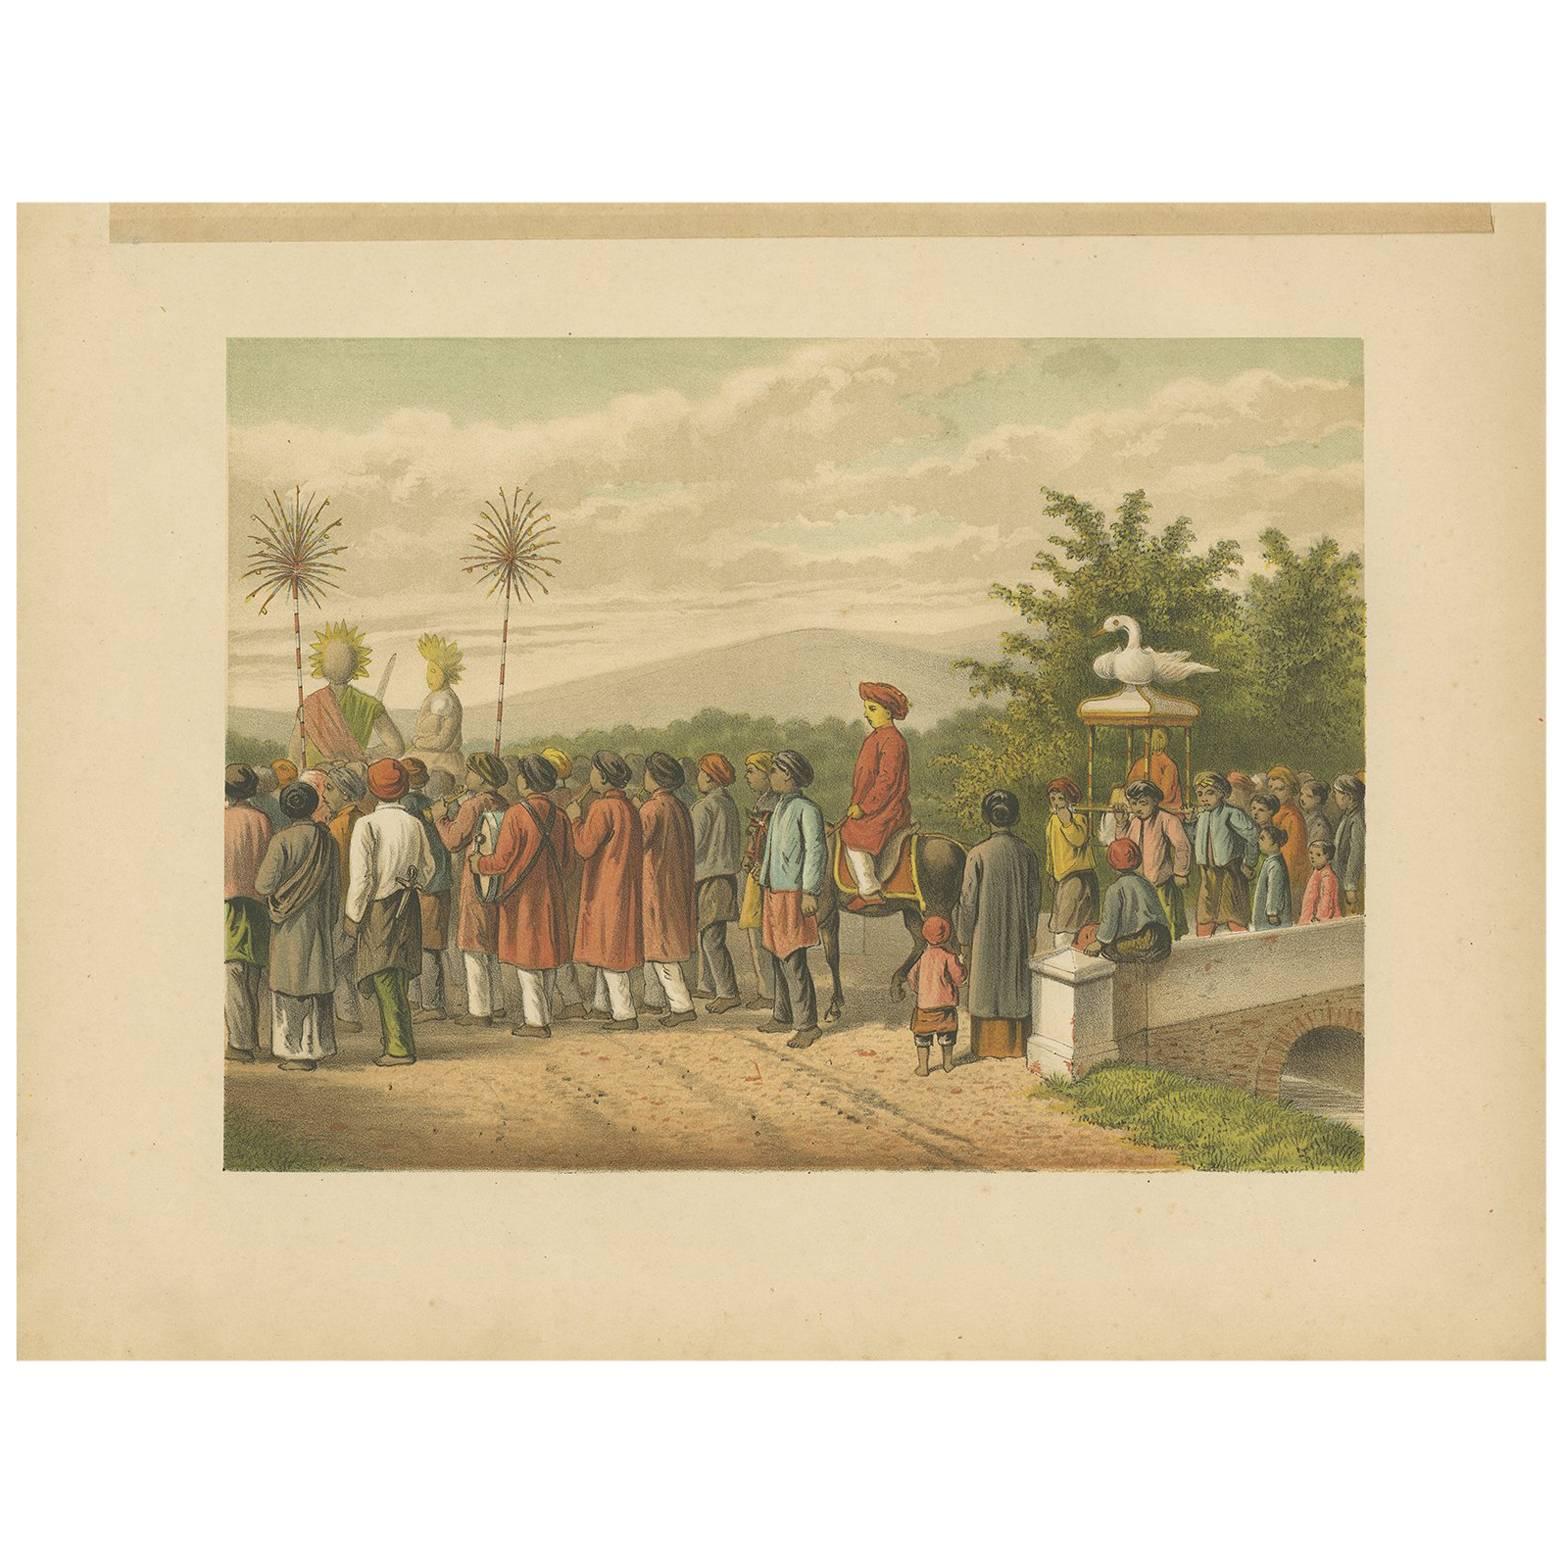 Antique Print of a Javanese Wedding Ceremony by M.T.H. Perelaer, 1888 For Sale